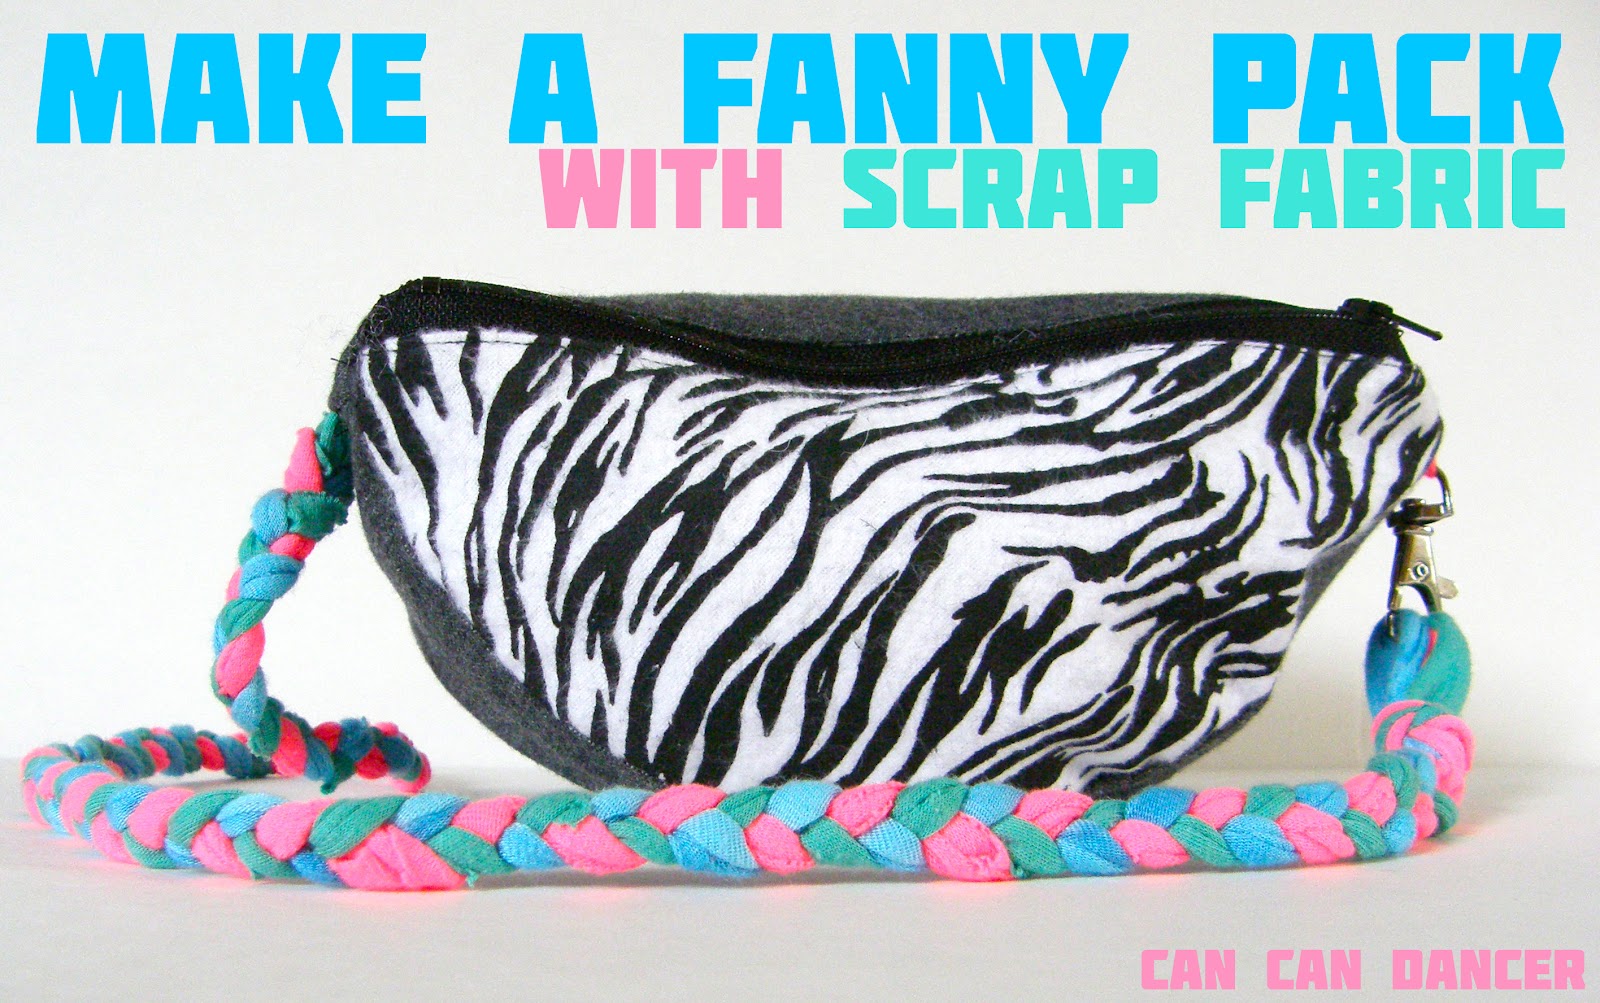 Can Can Dancer: Fanny Pack made with Scrap Fabric